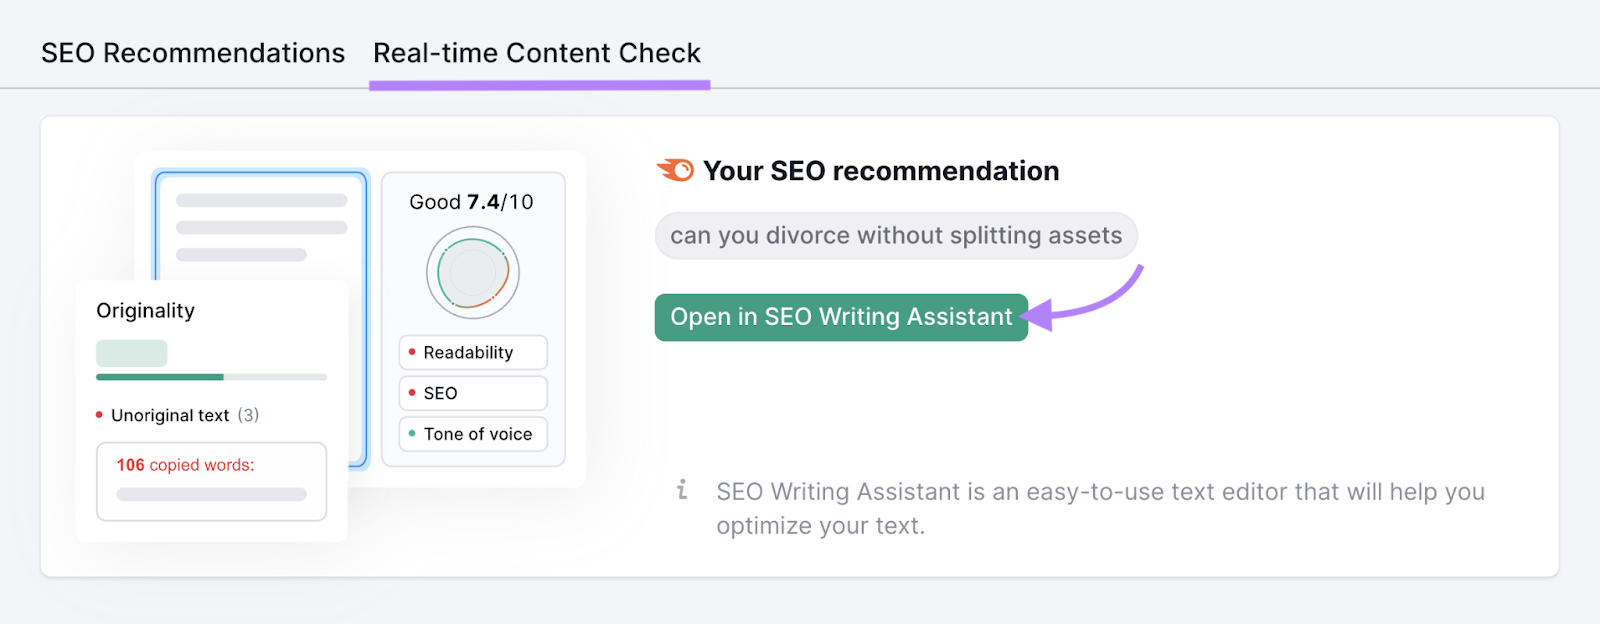 "Open in SEO Writing Assistant" button